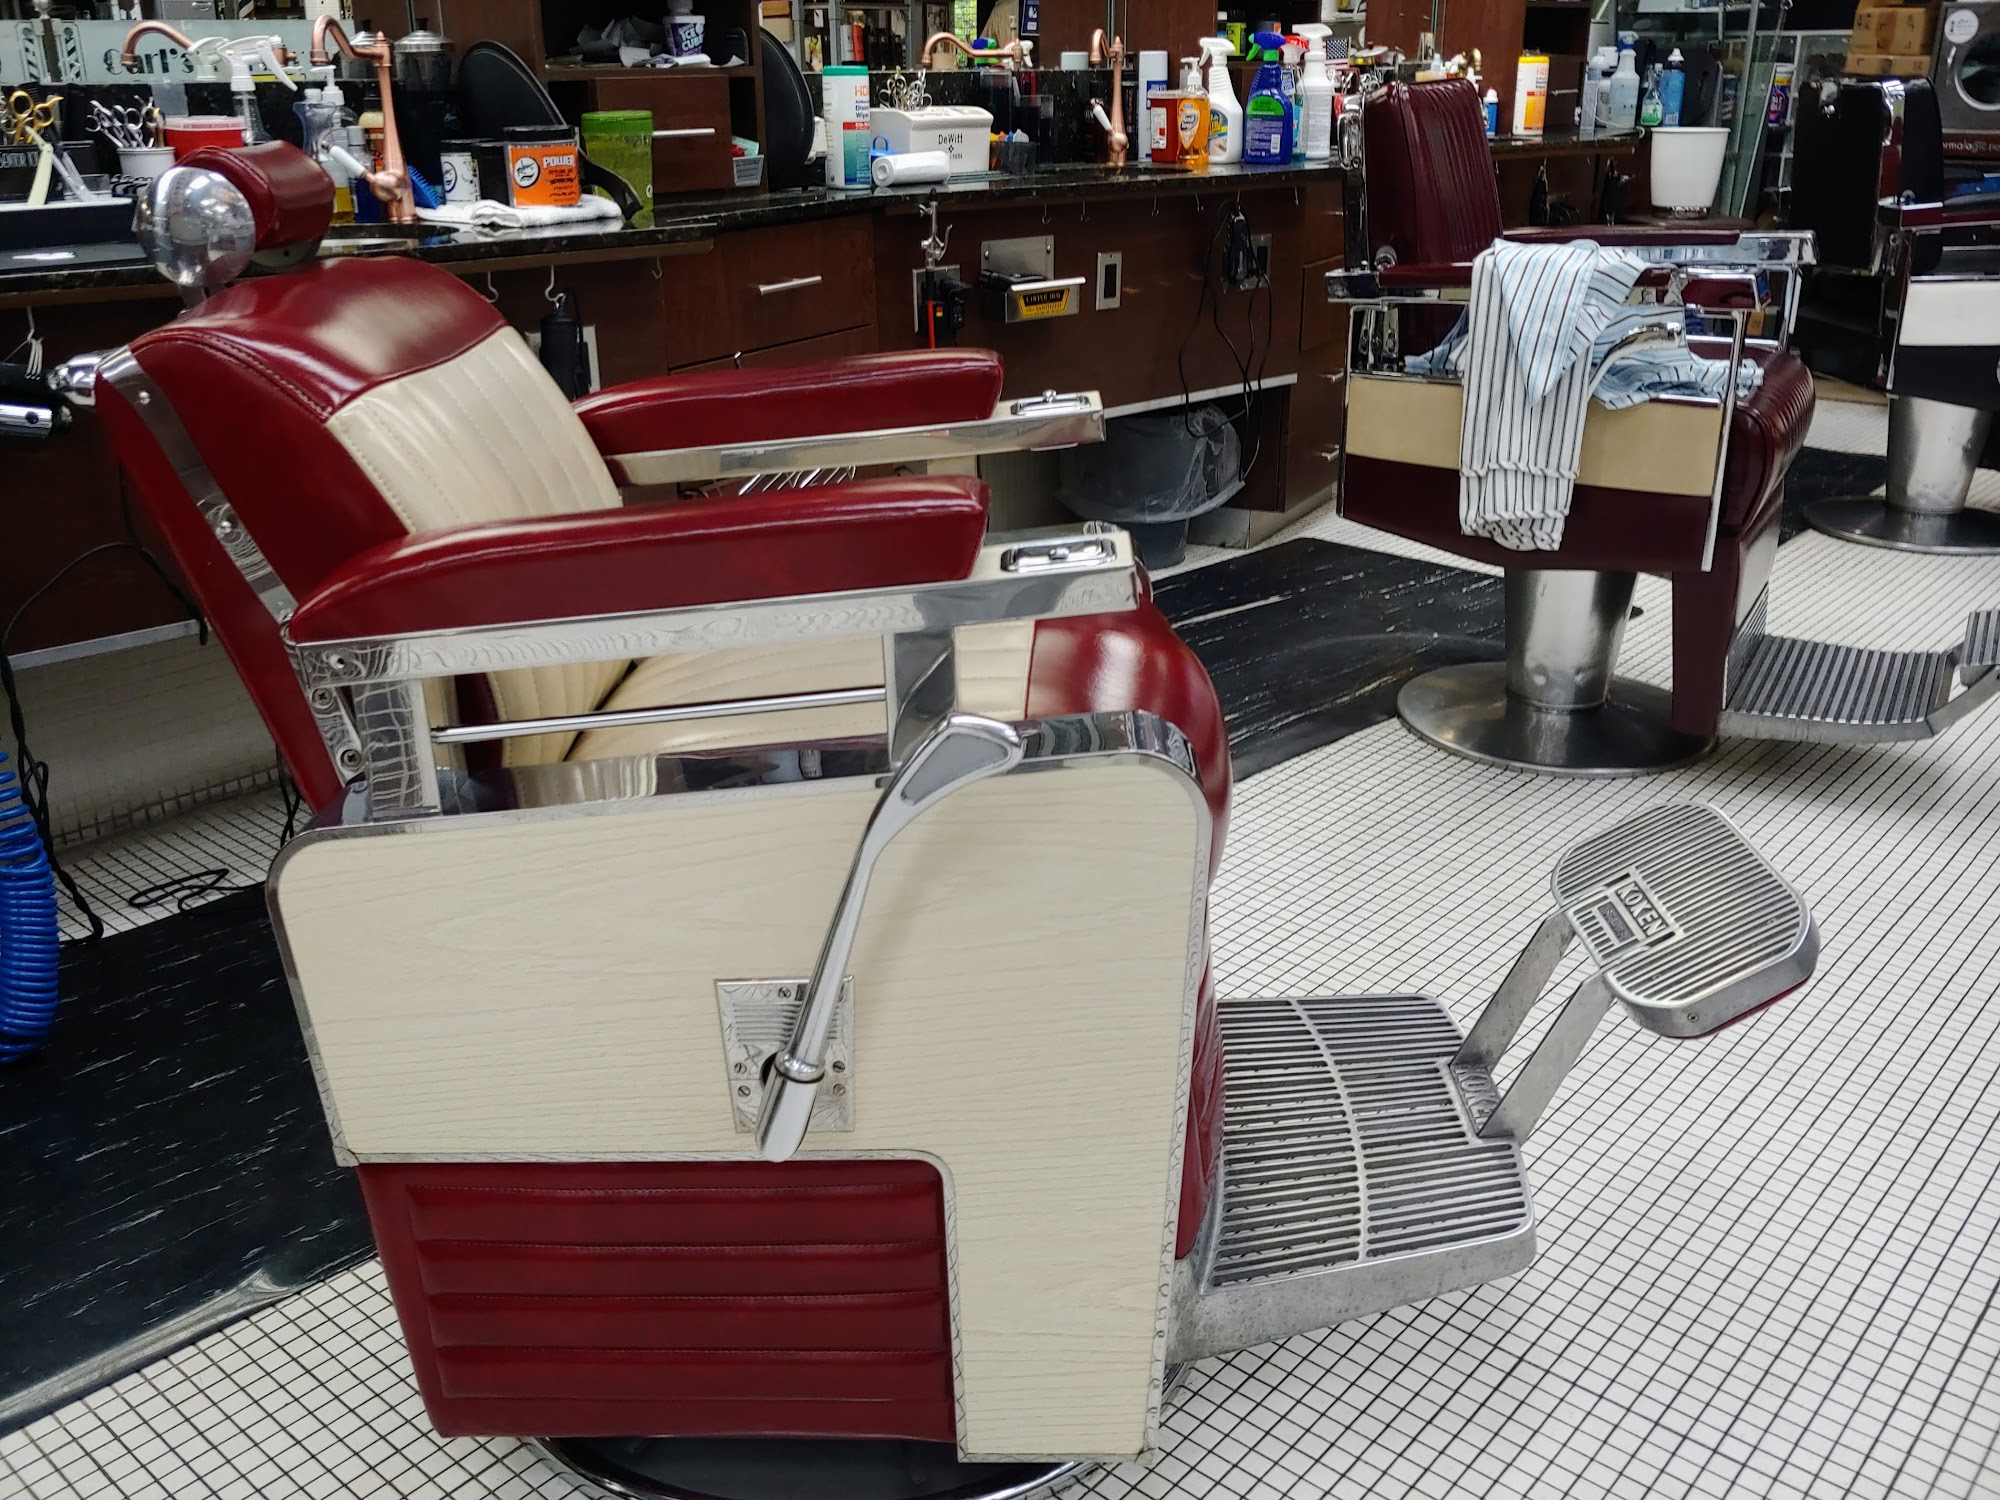 Carl's Old Time Barber Shop in Weston